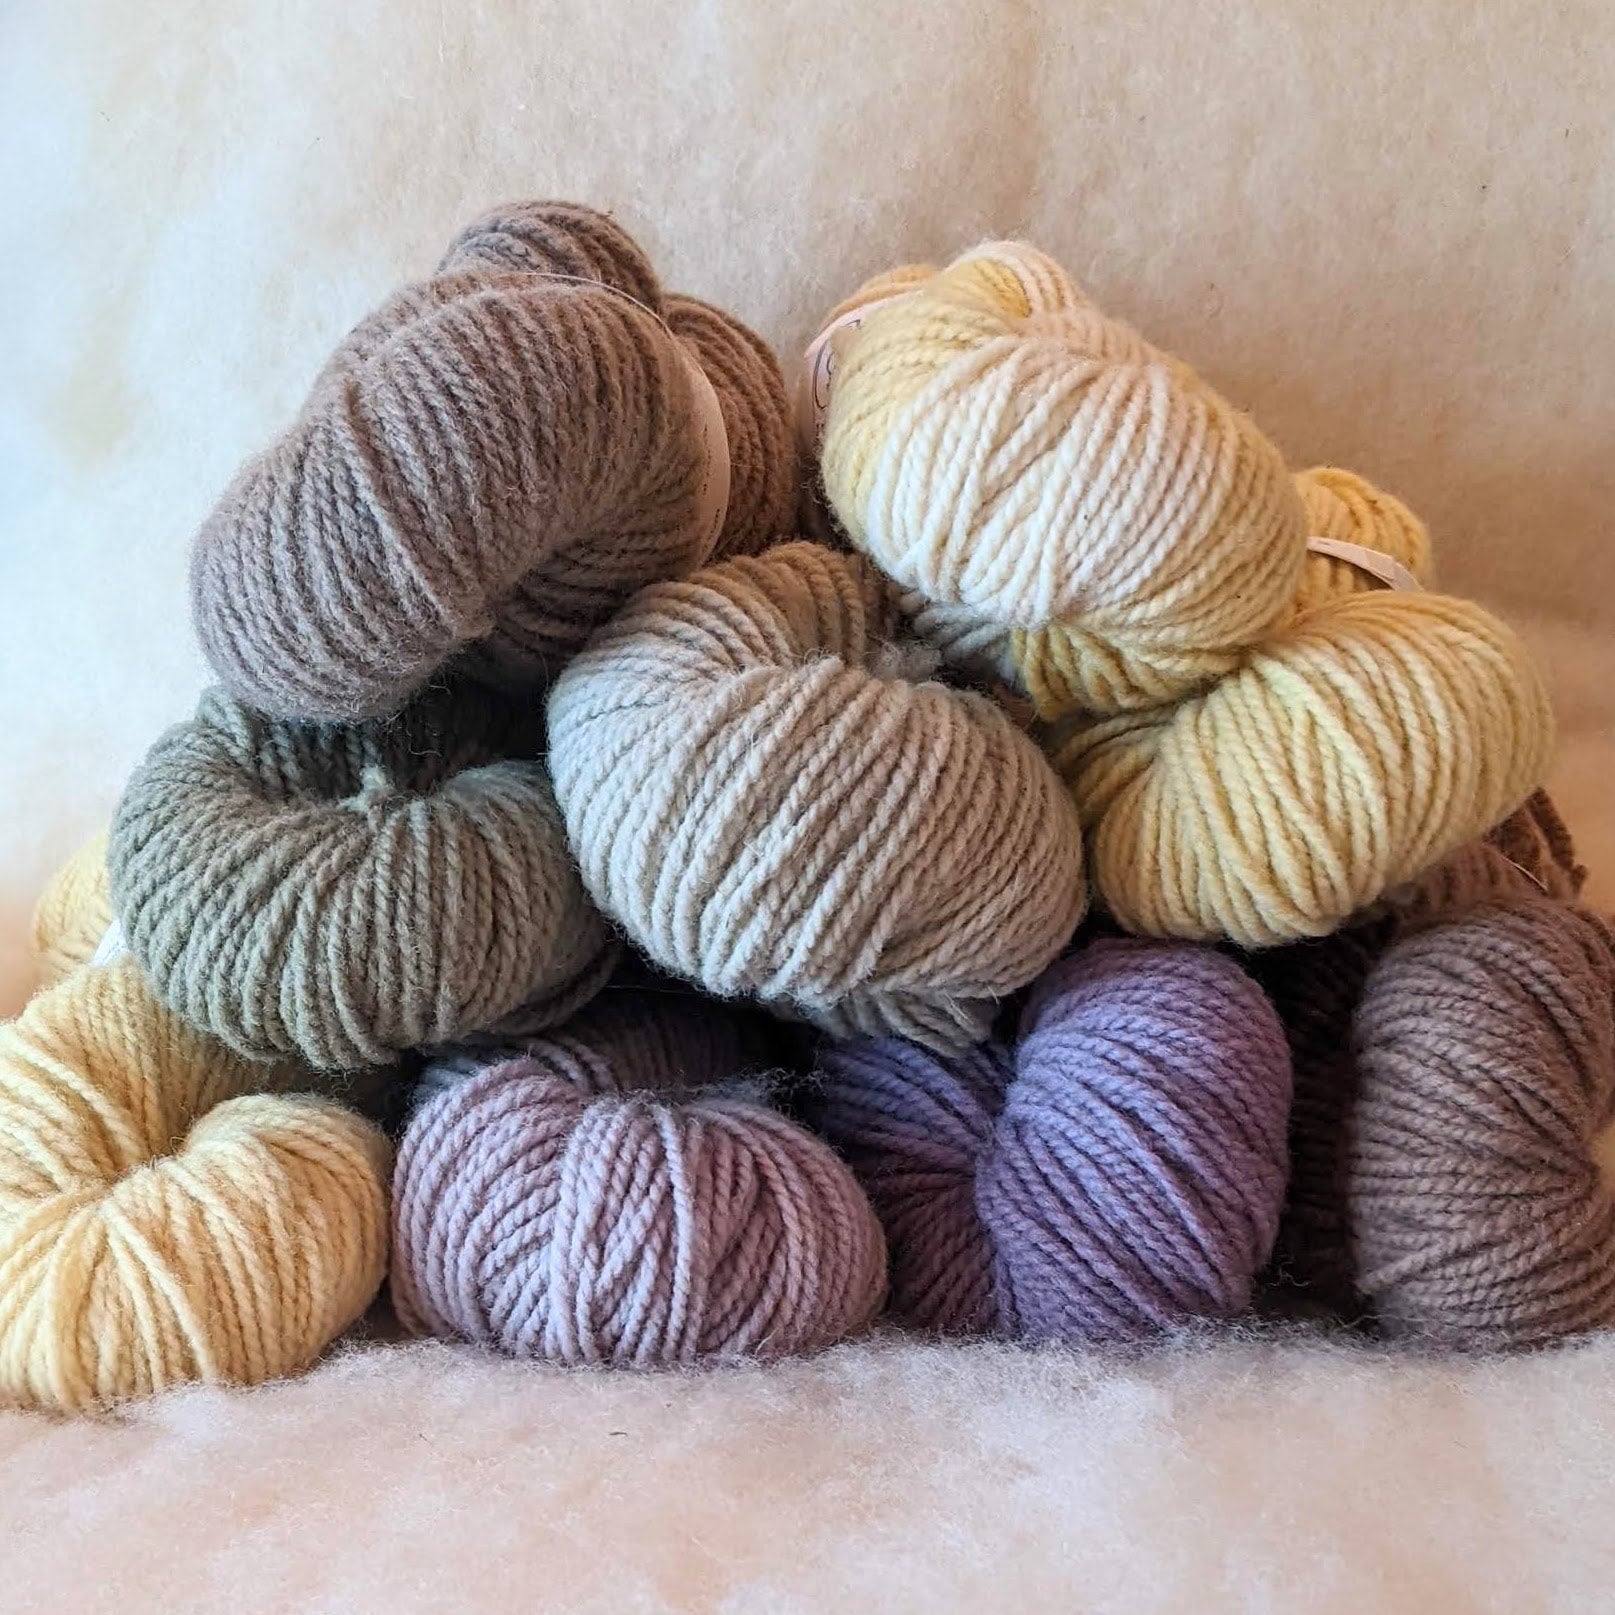 Forage Yarn - 2ply Worsted